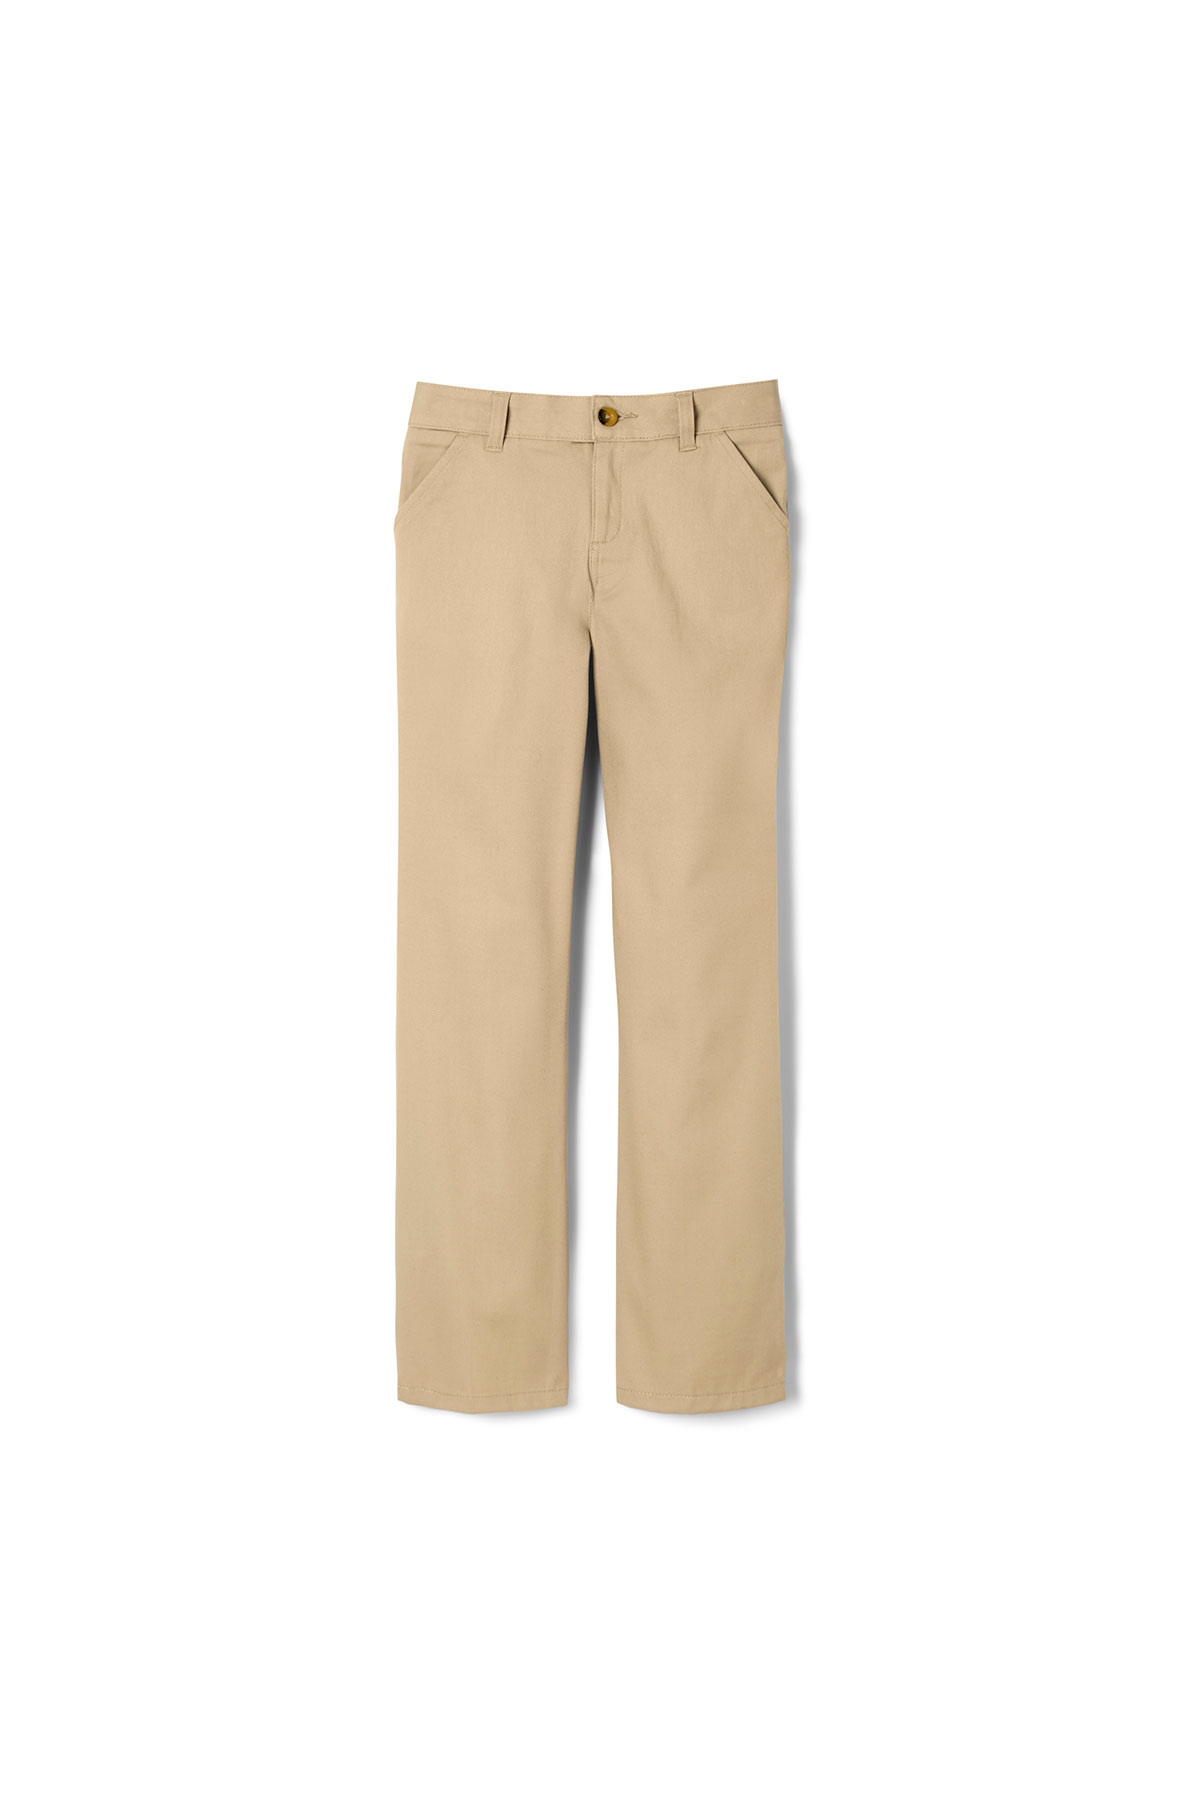 Girls’ Pull-On Straight Fit Stretch Twill Pant - French Toast